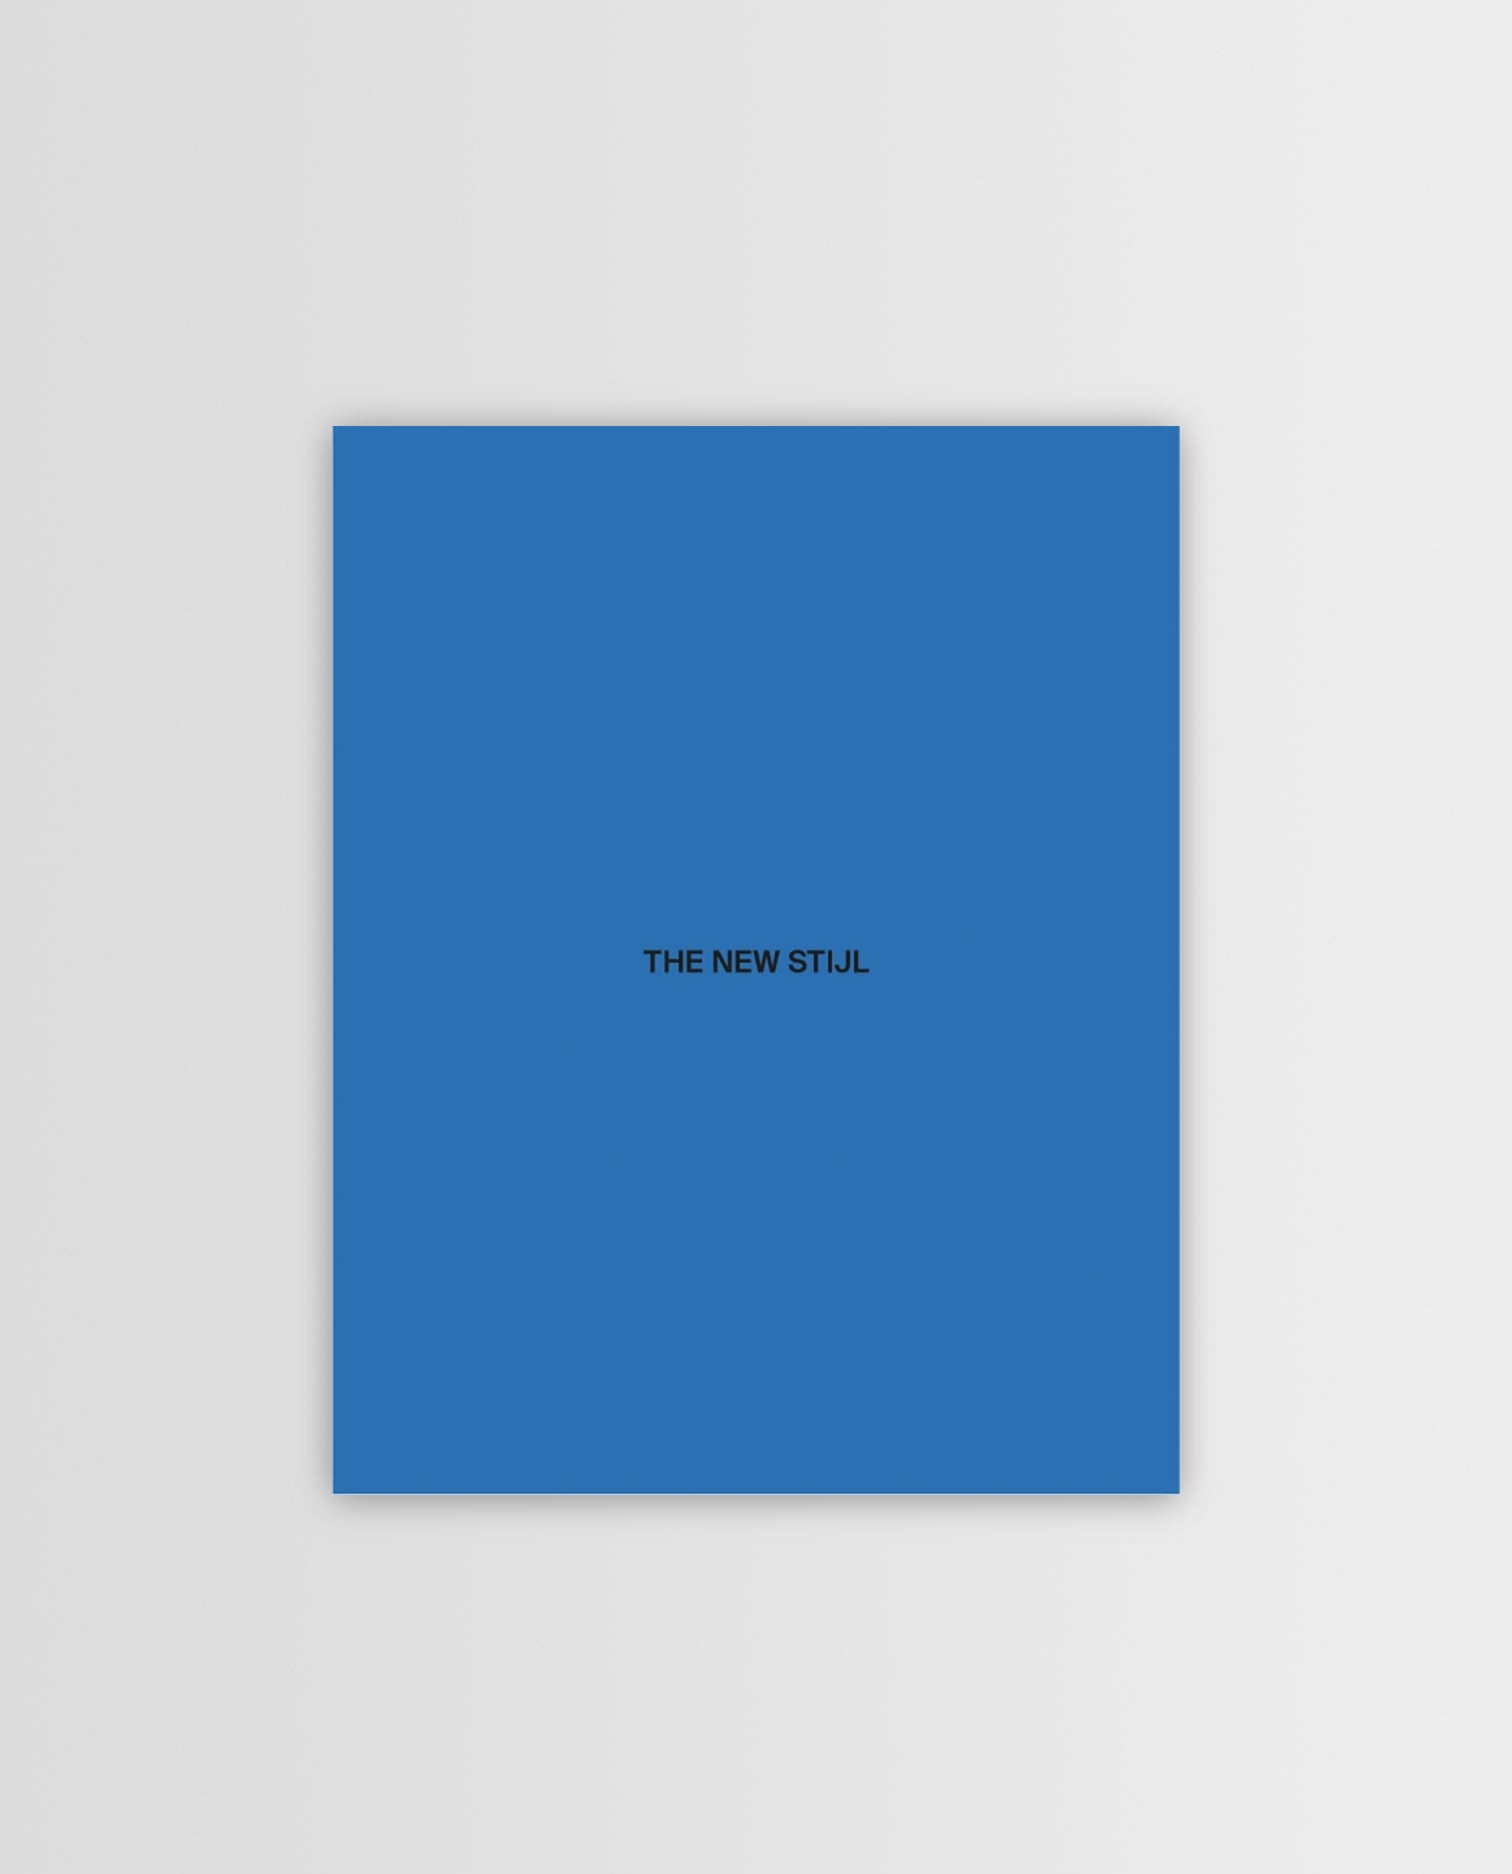 THE NEW STIJL (BLUE COVER)